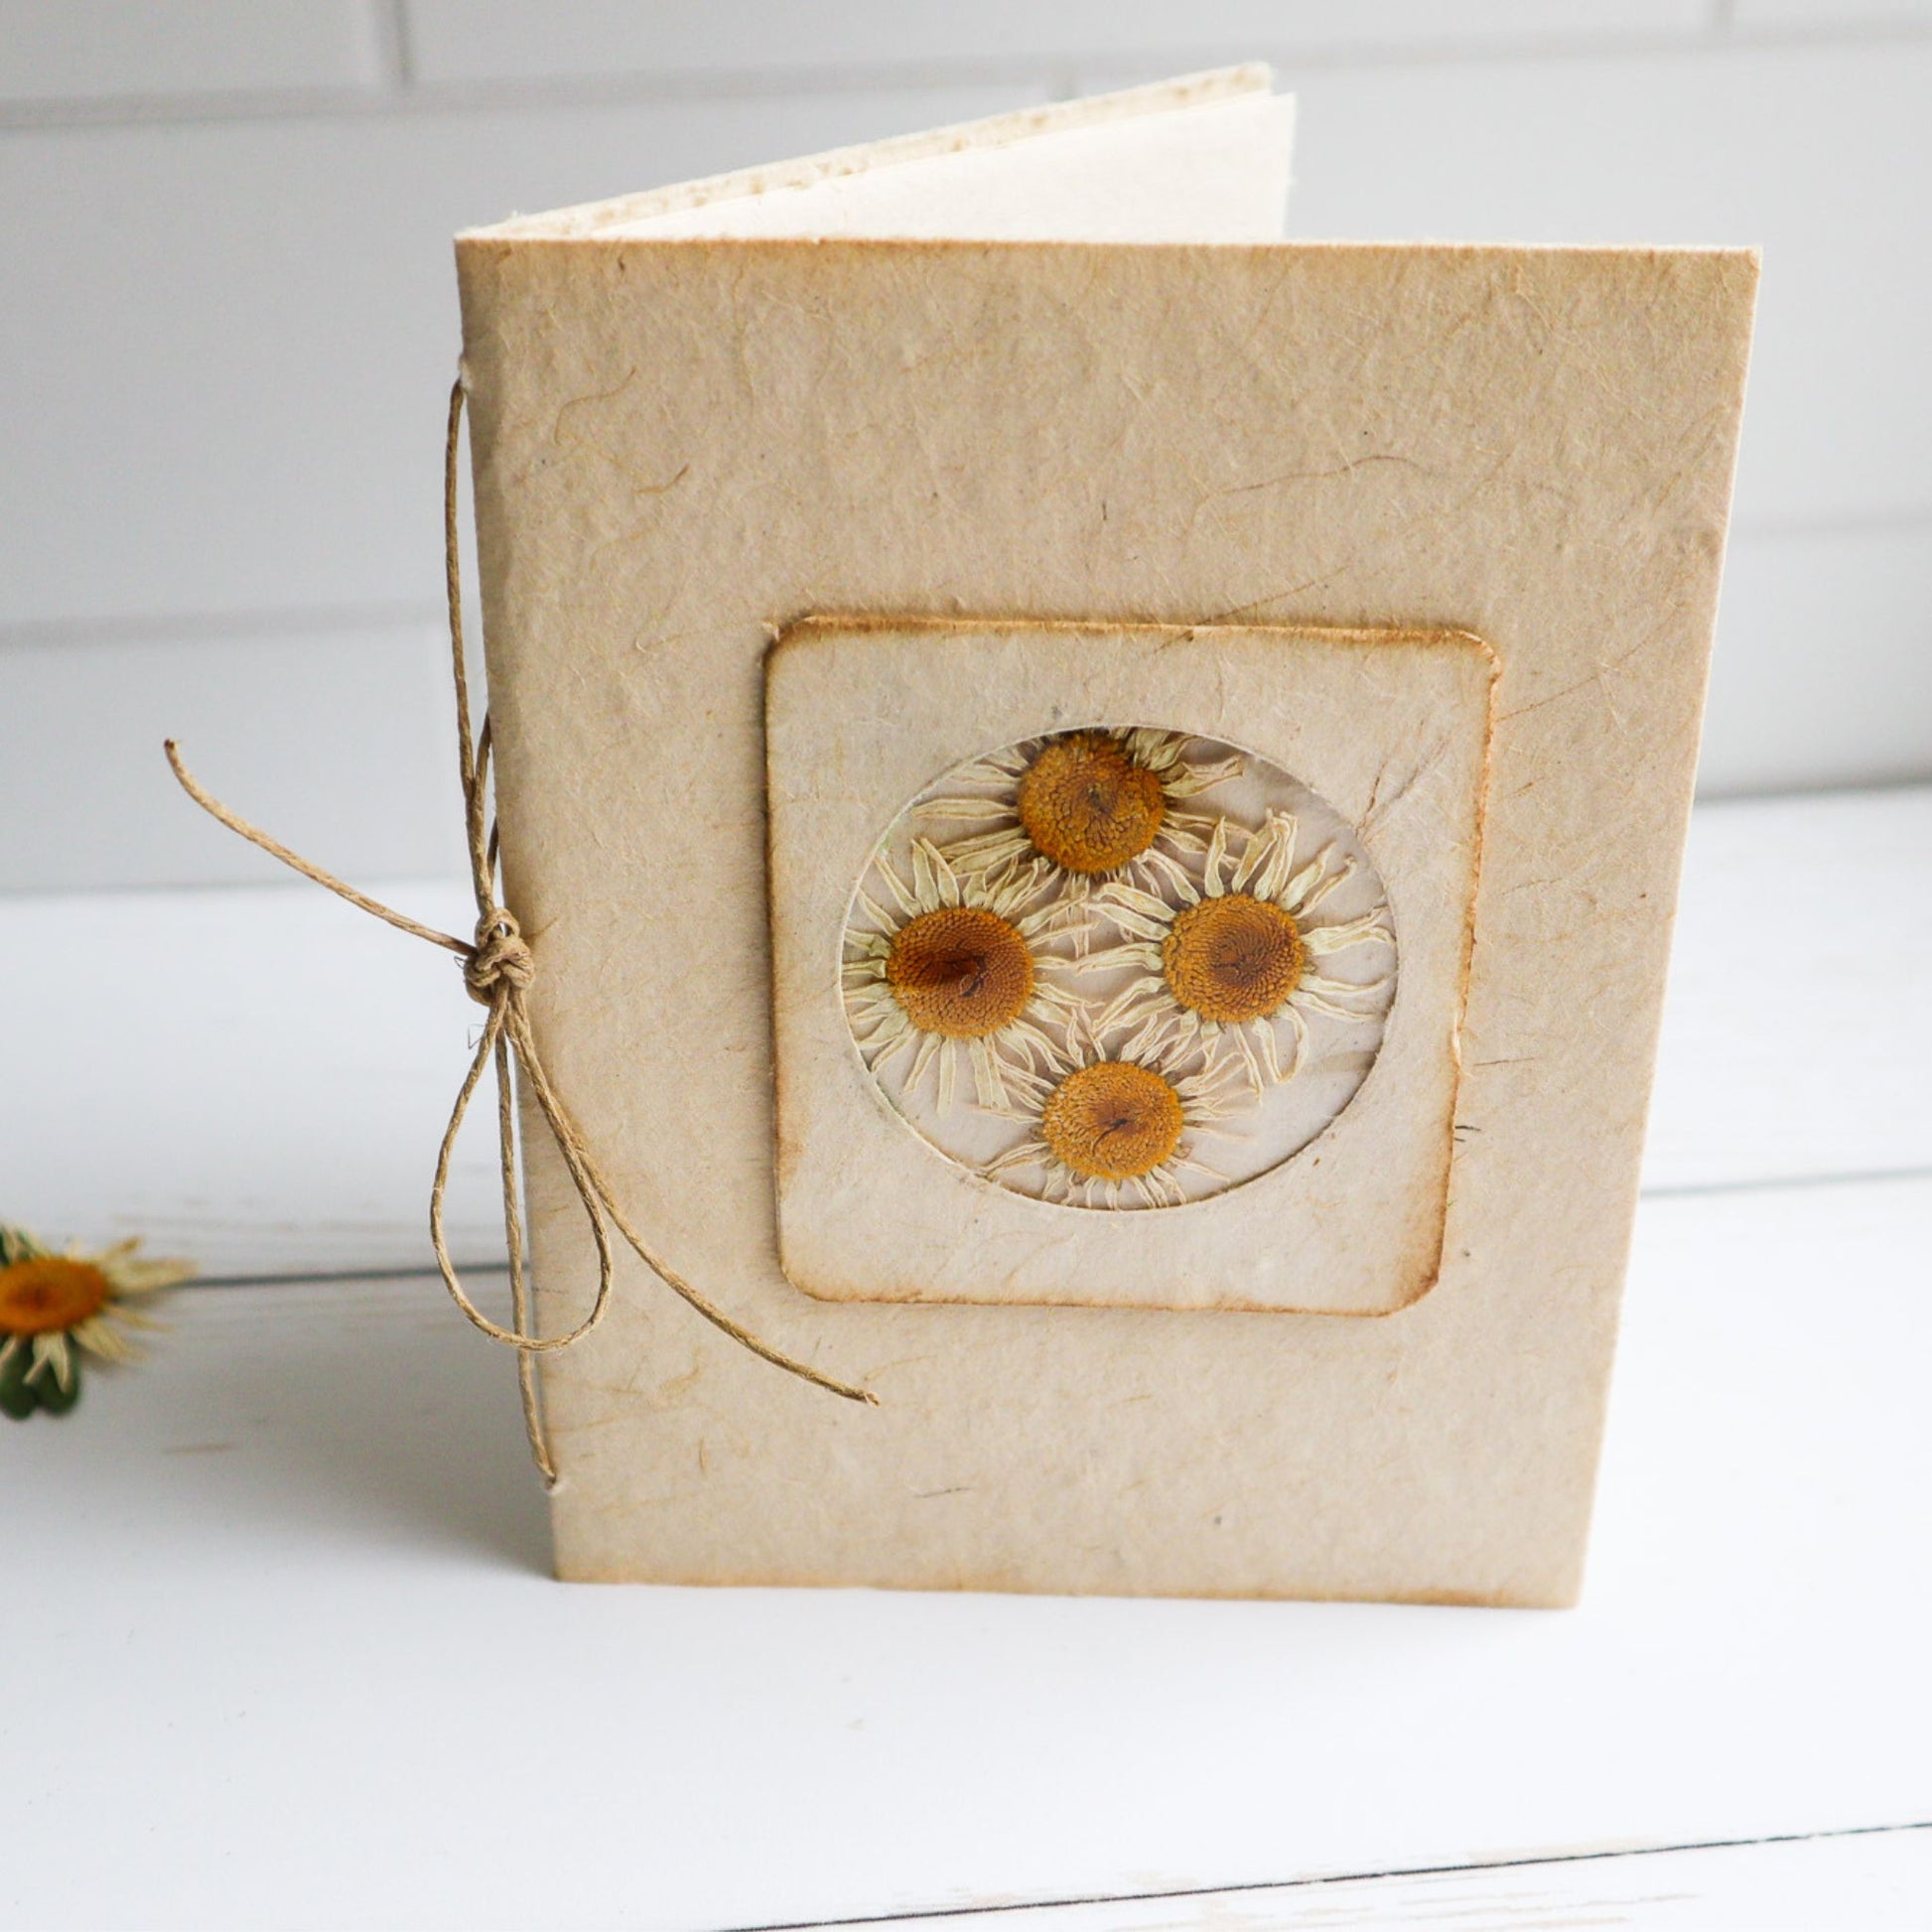 Helen Jeanne Handmade plantable seed paper journal with dried daisy type flowers on the cover and tied with biodegradable hemp cord.